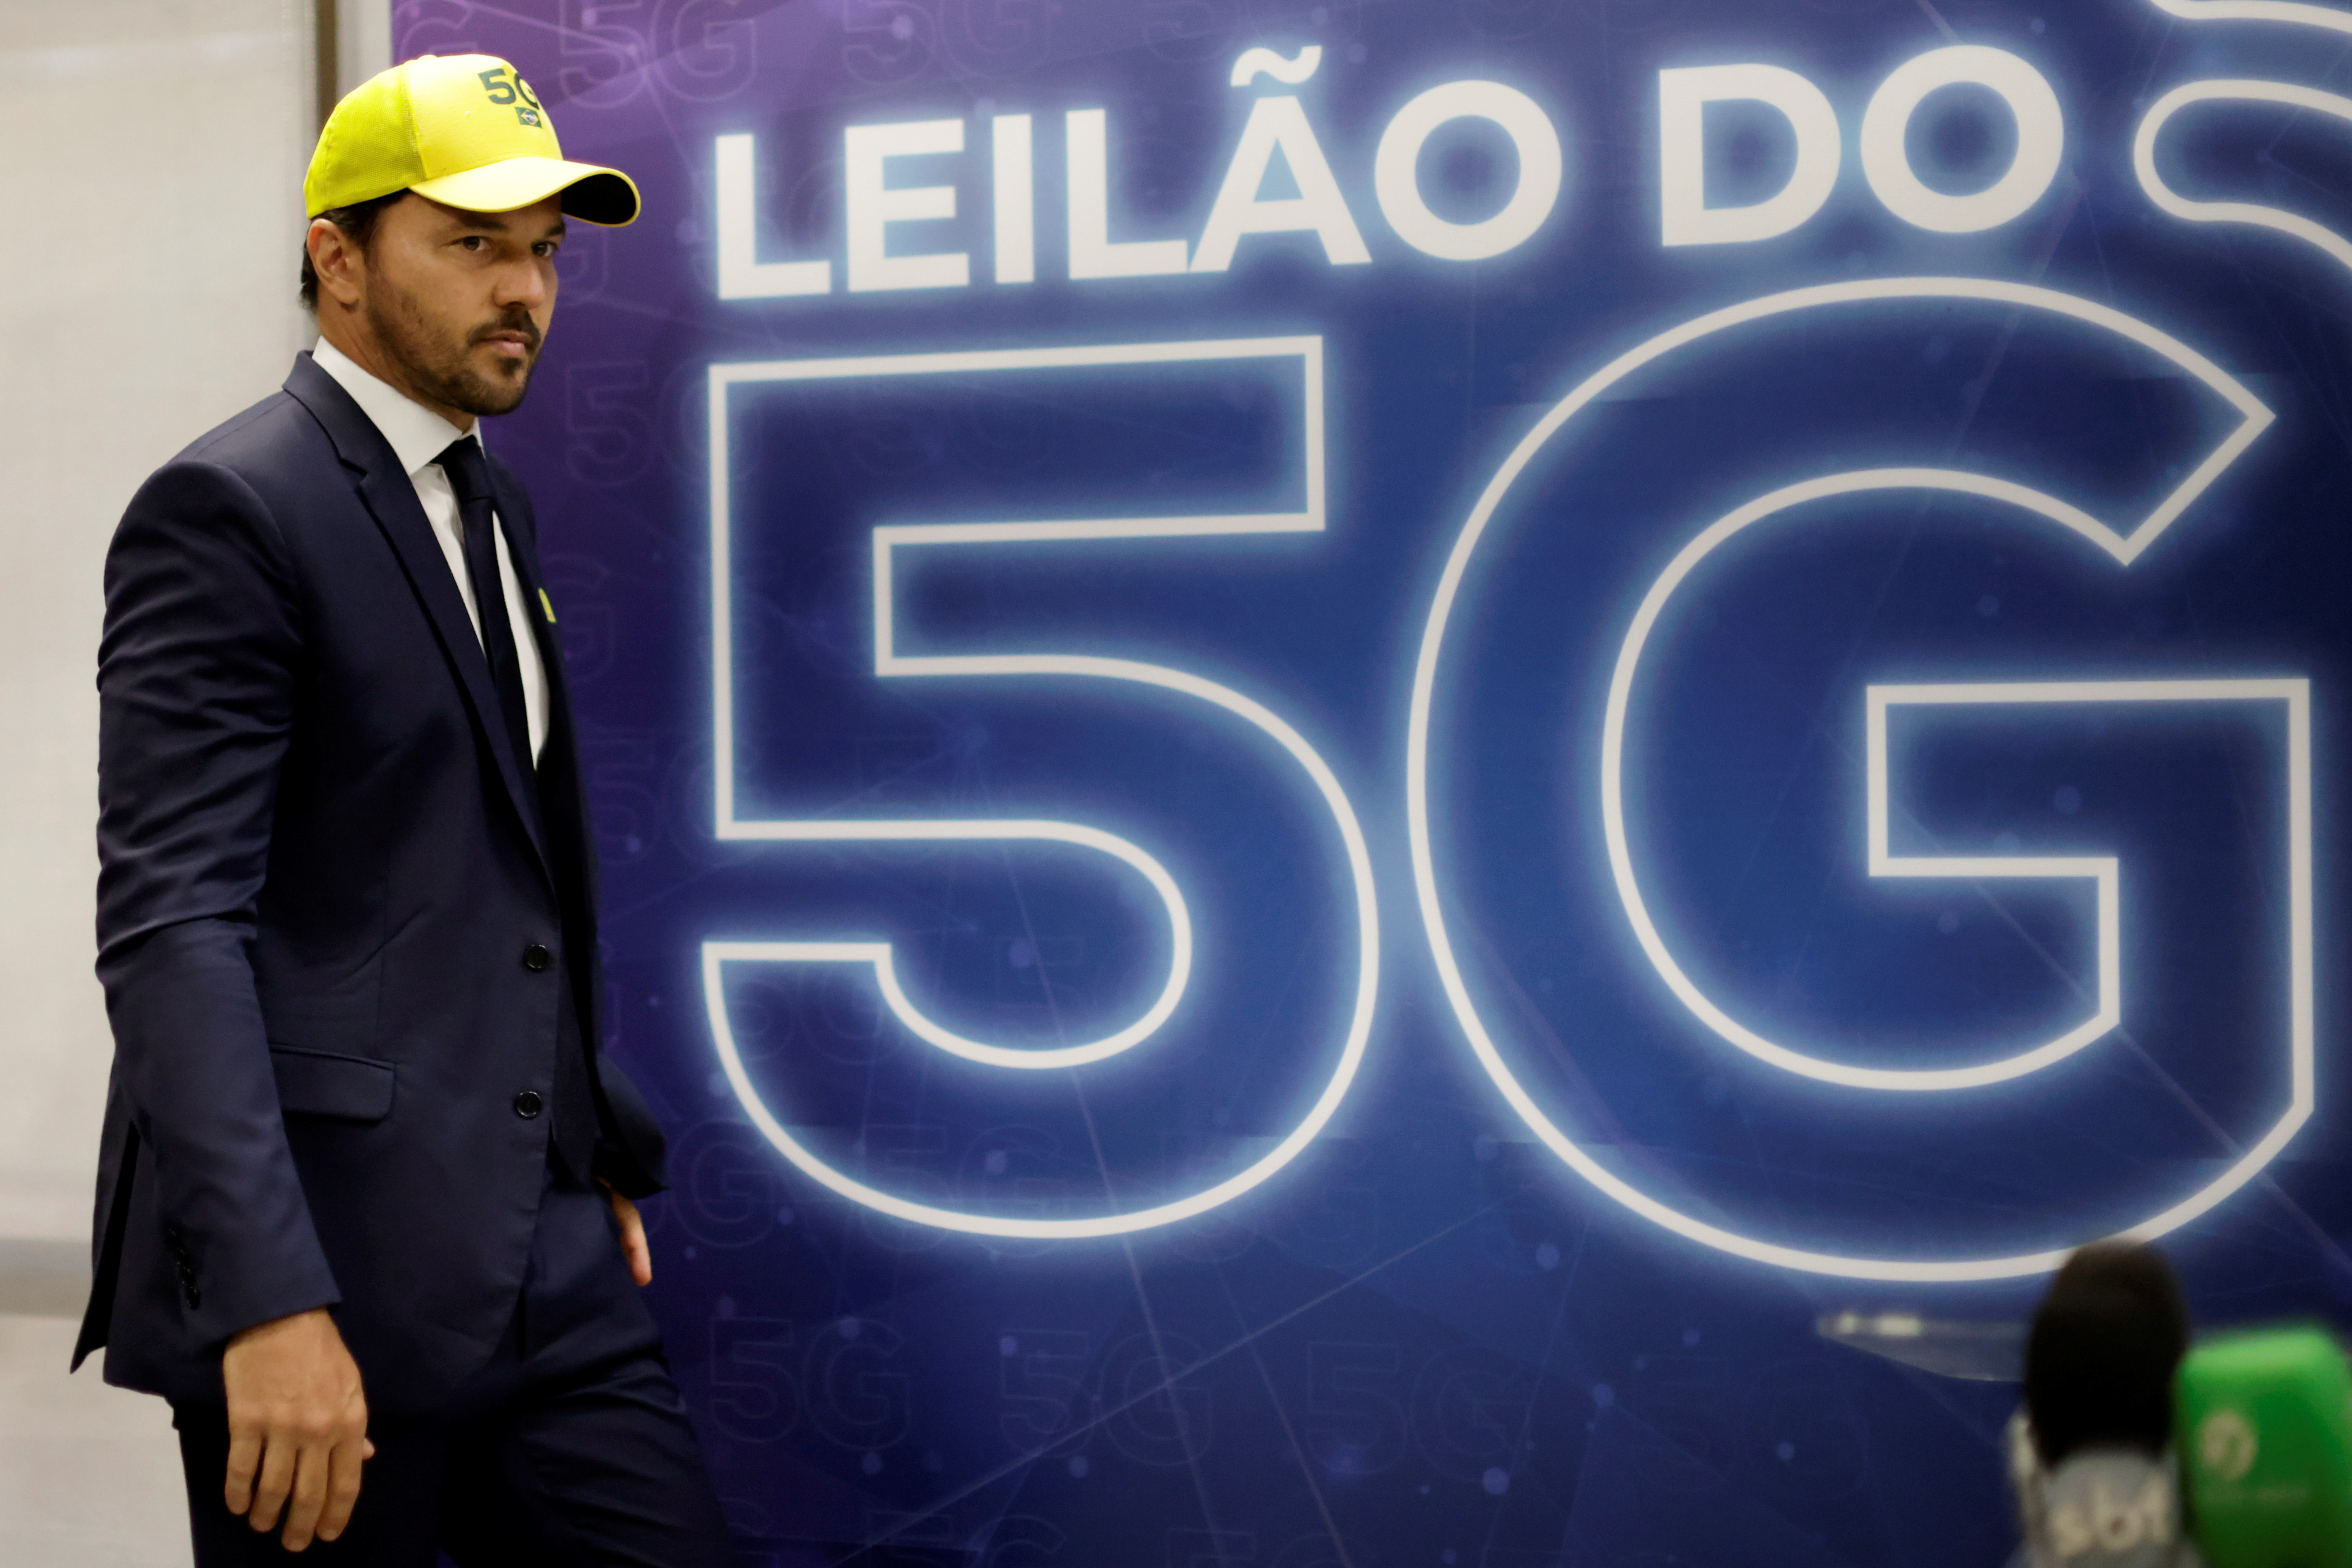 In Brazil, 5G on hold as spectrum auction is delayed - RCR Wireless News